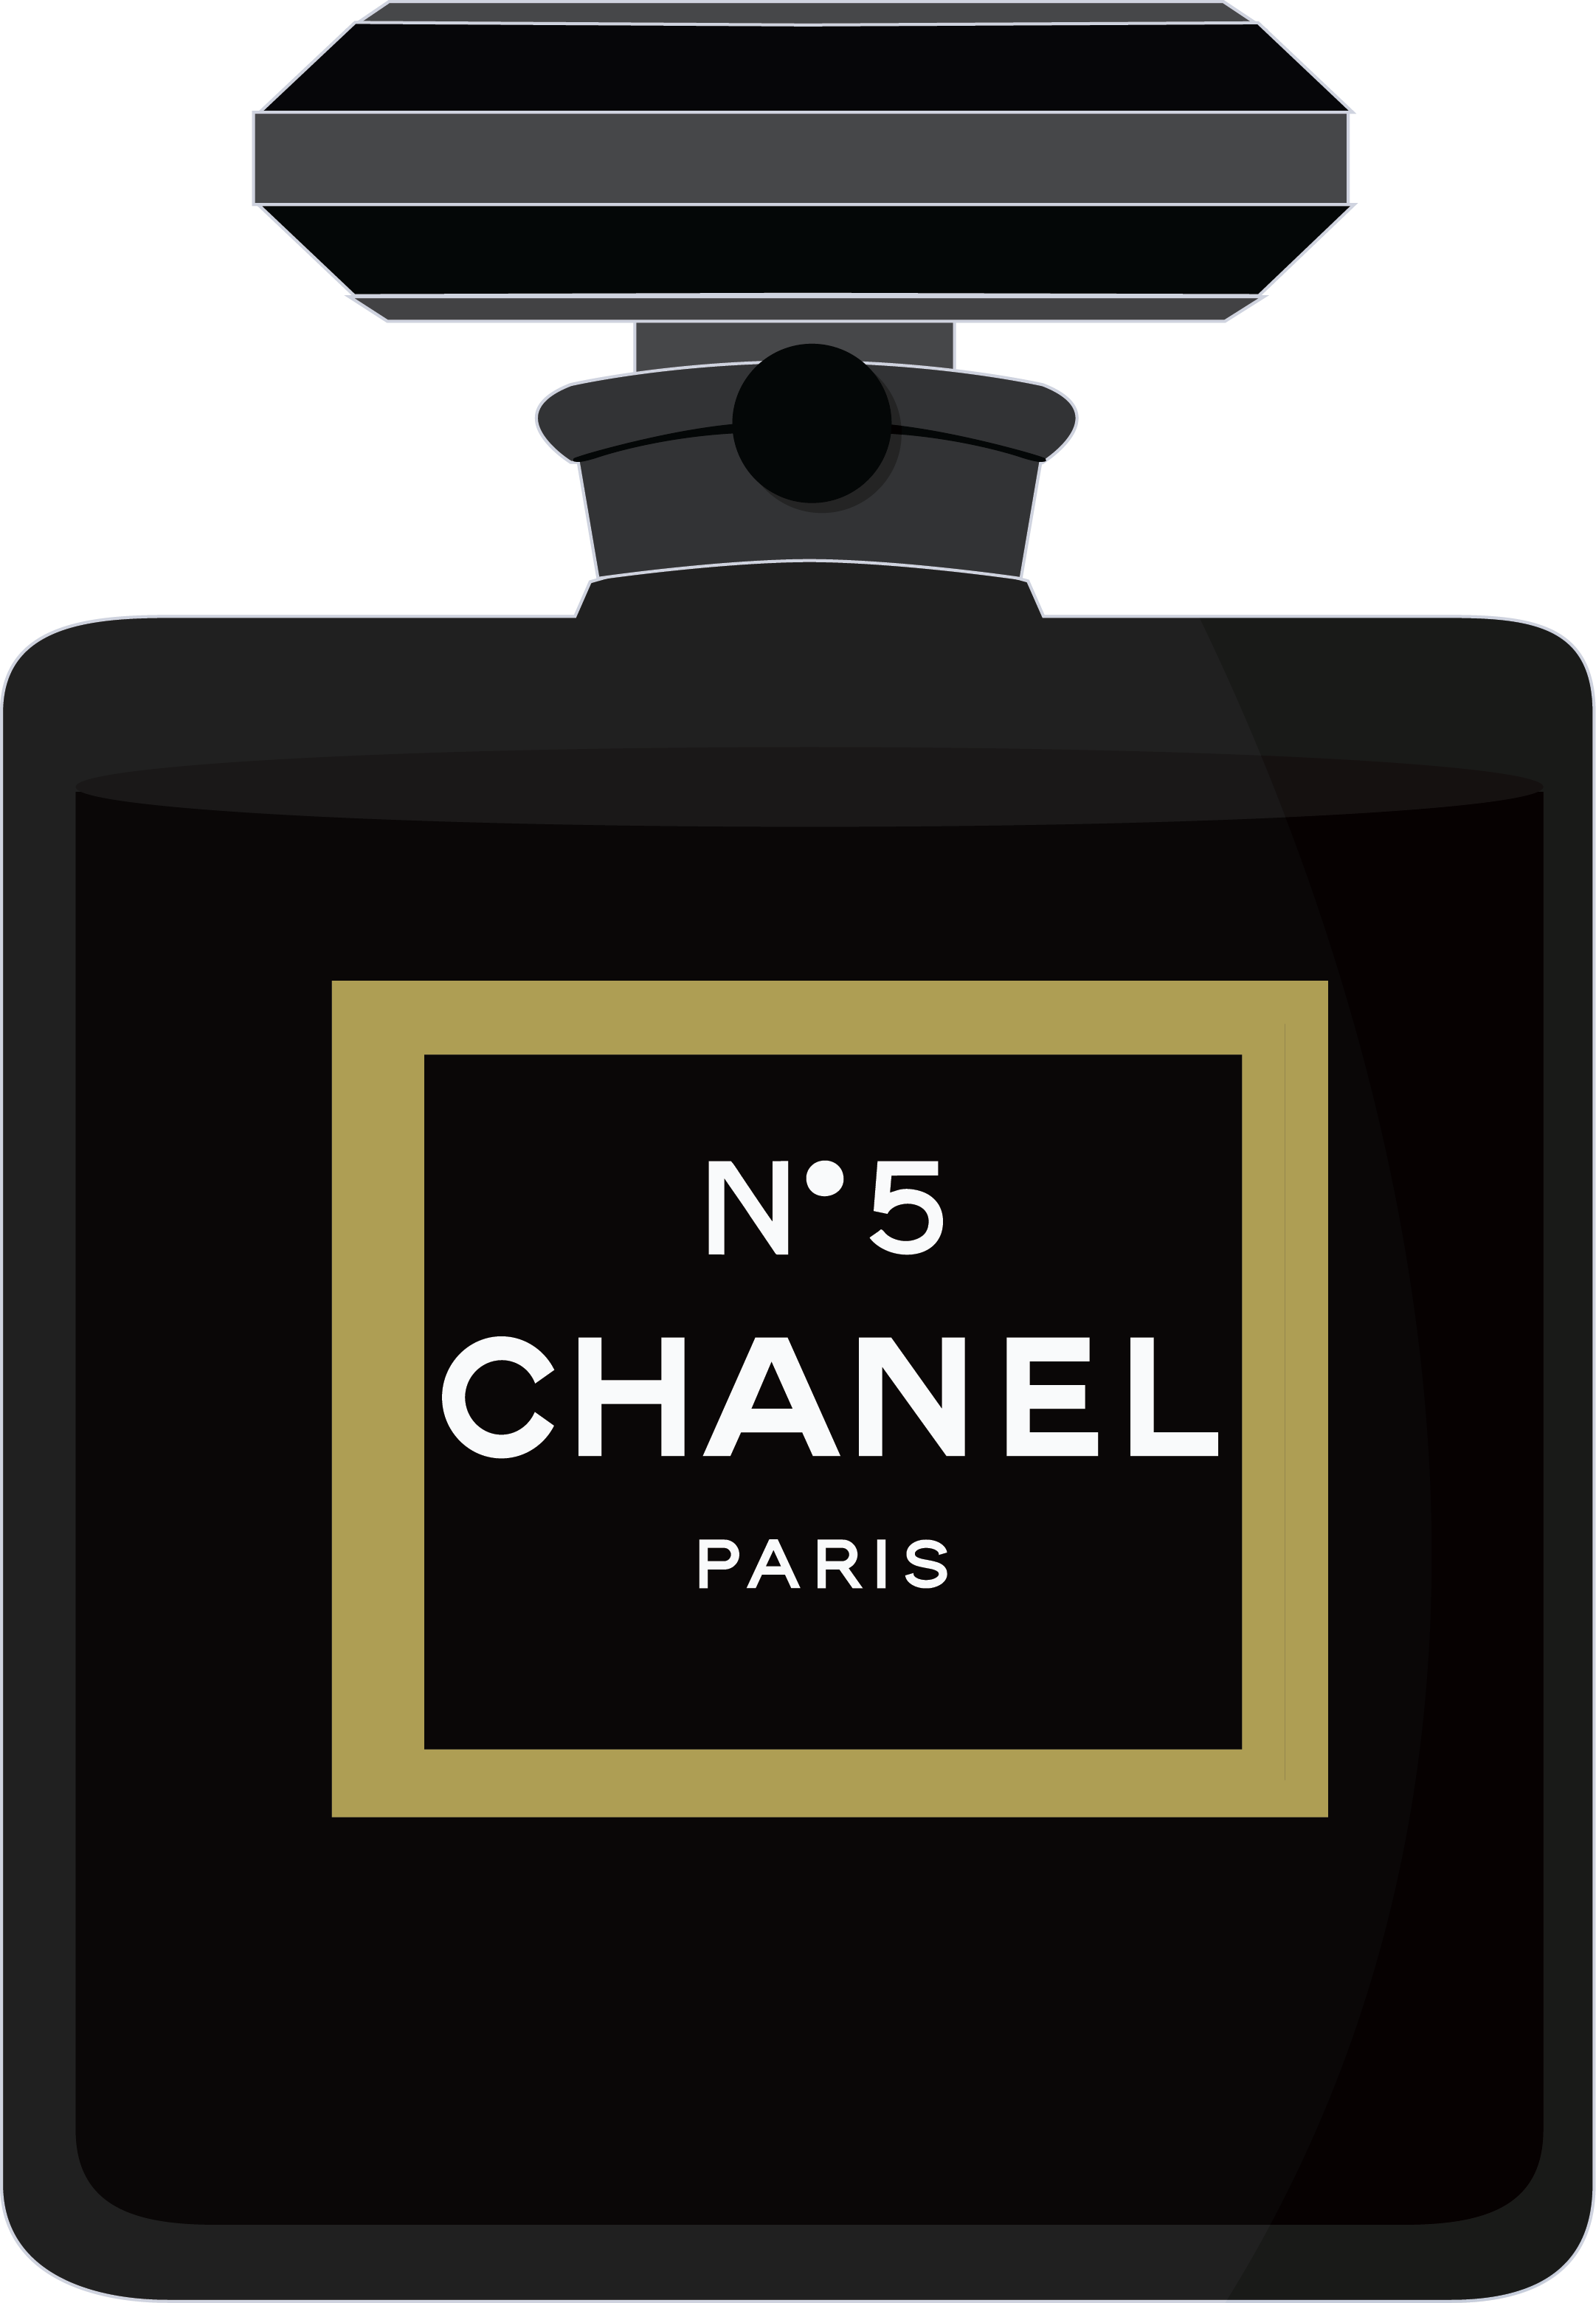 Chanel Perfume PNG File